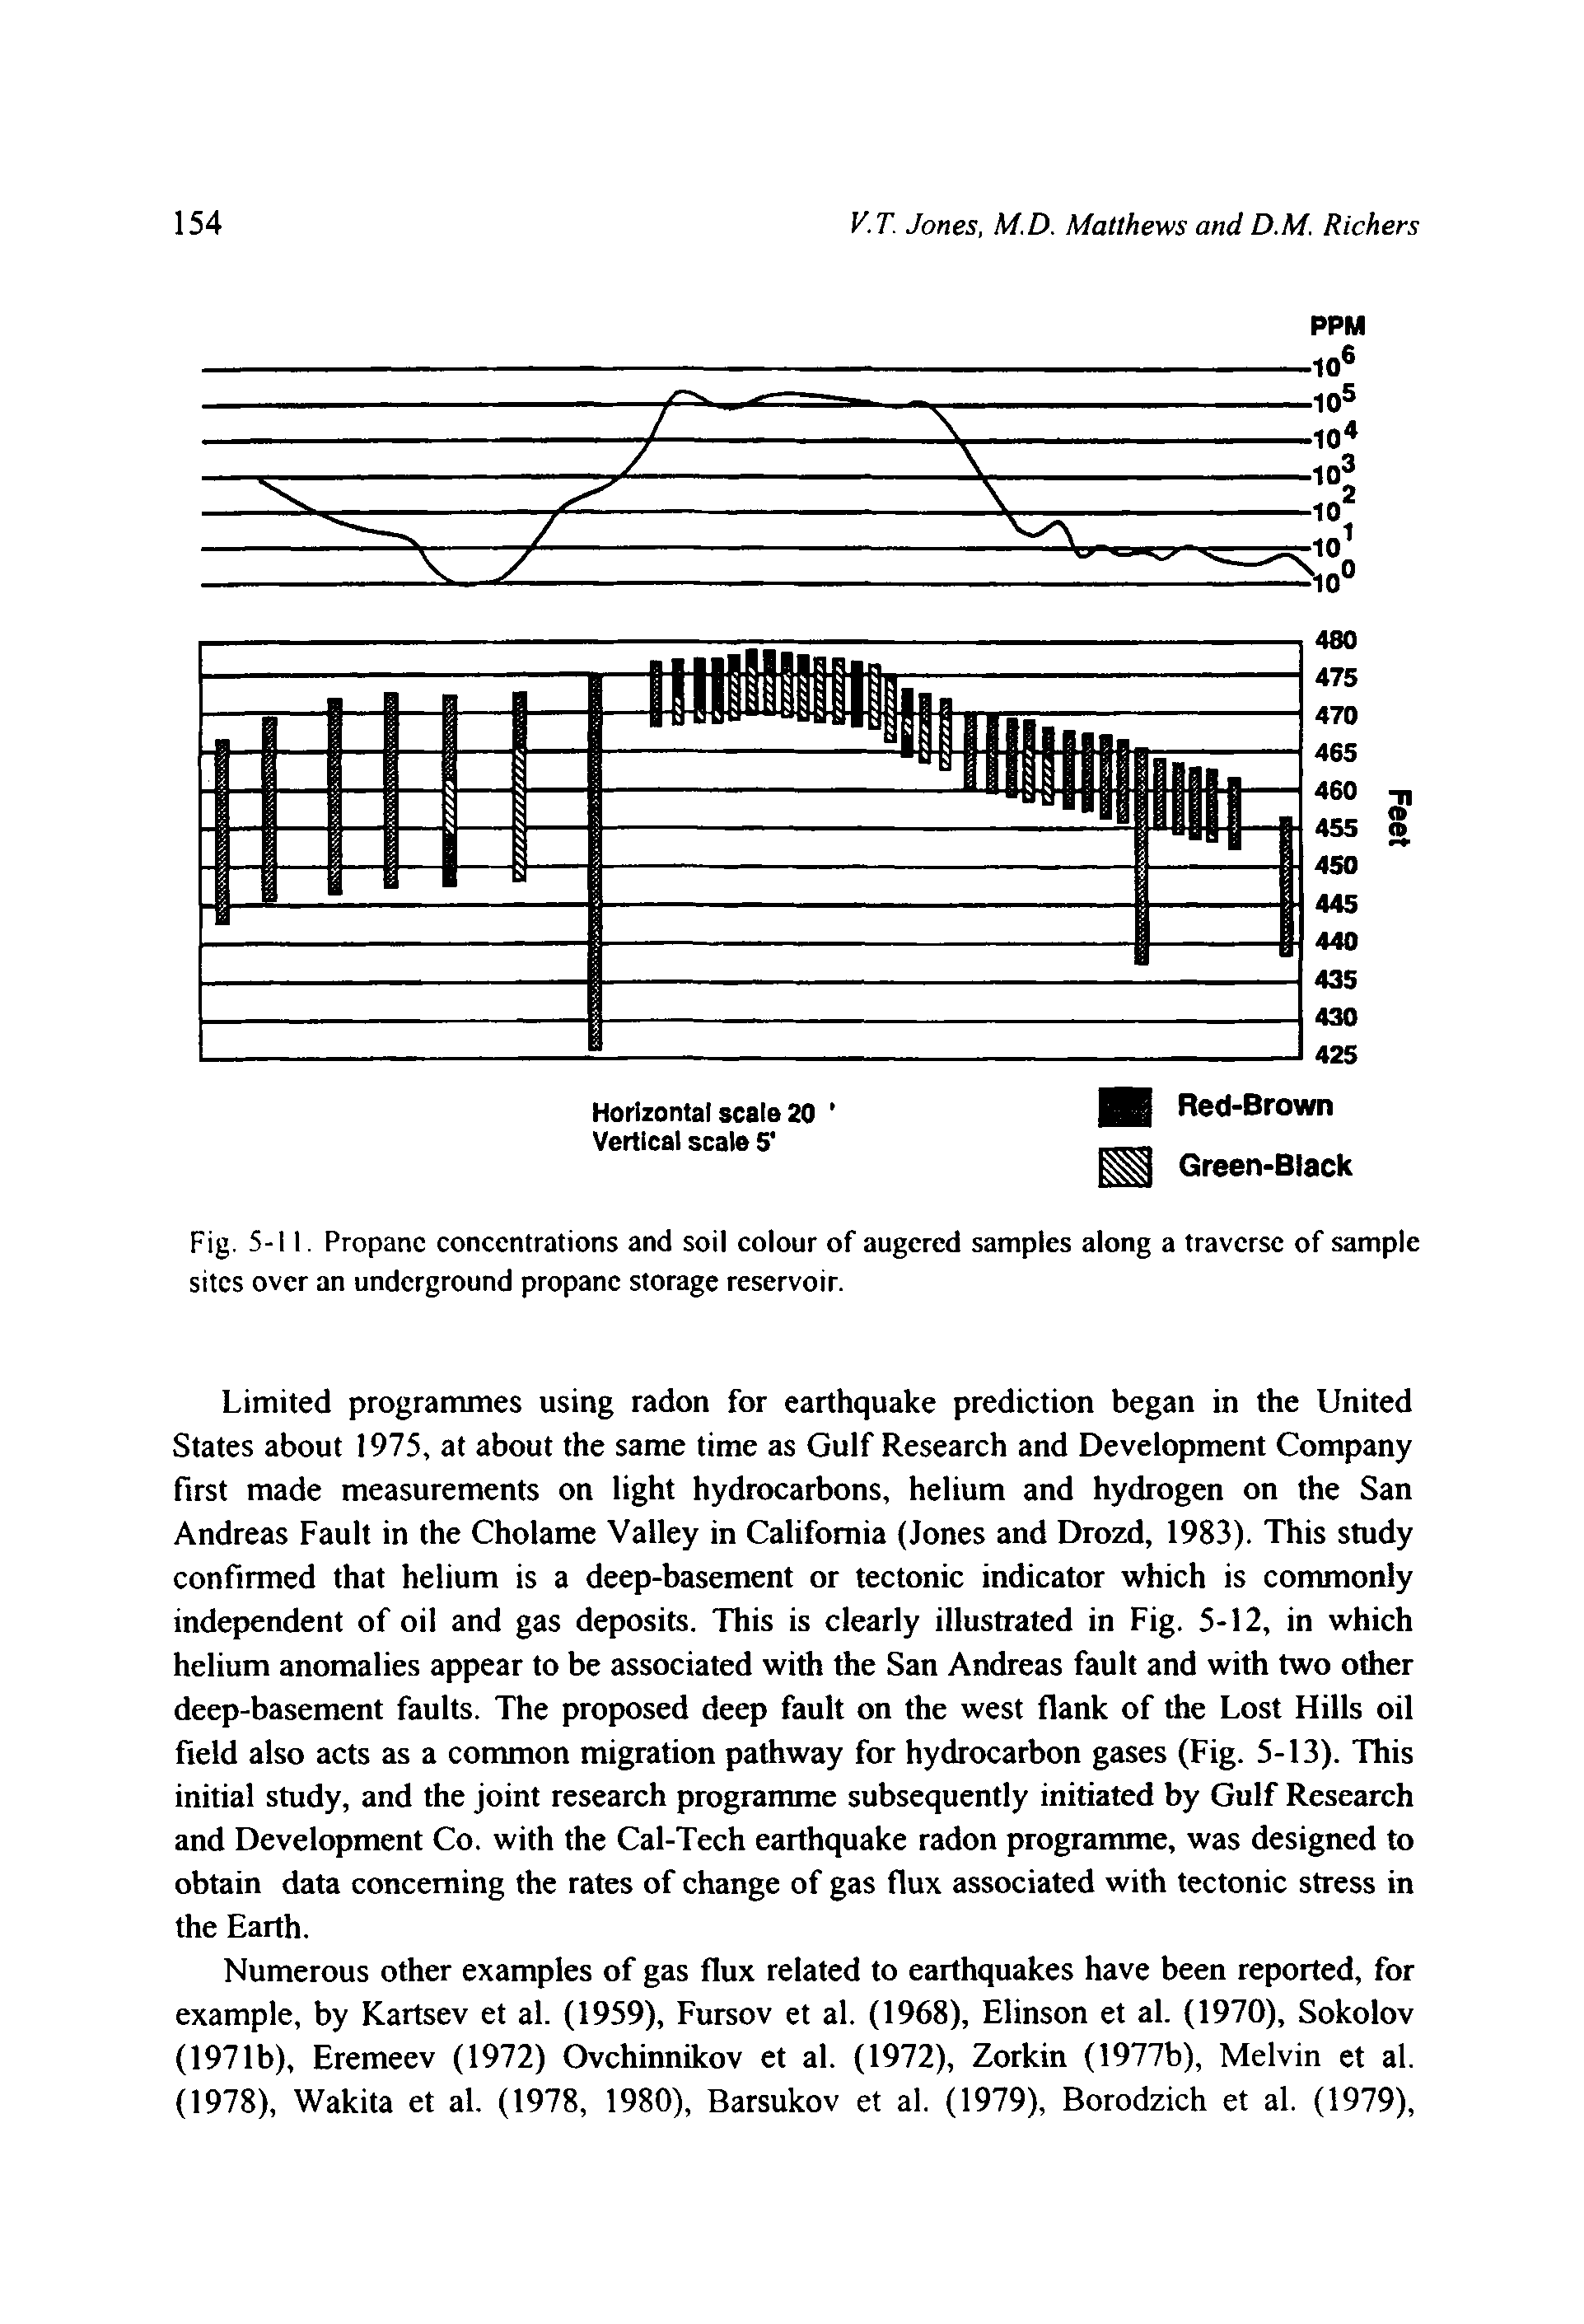 Fig. 5-I I. Propane concentrations and soil colour of augcred samples along a traverse of sample sites over an underground propane storage reservoir.